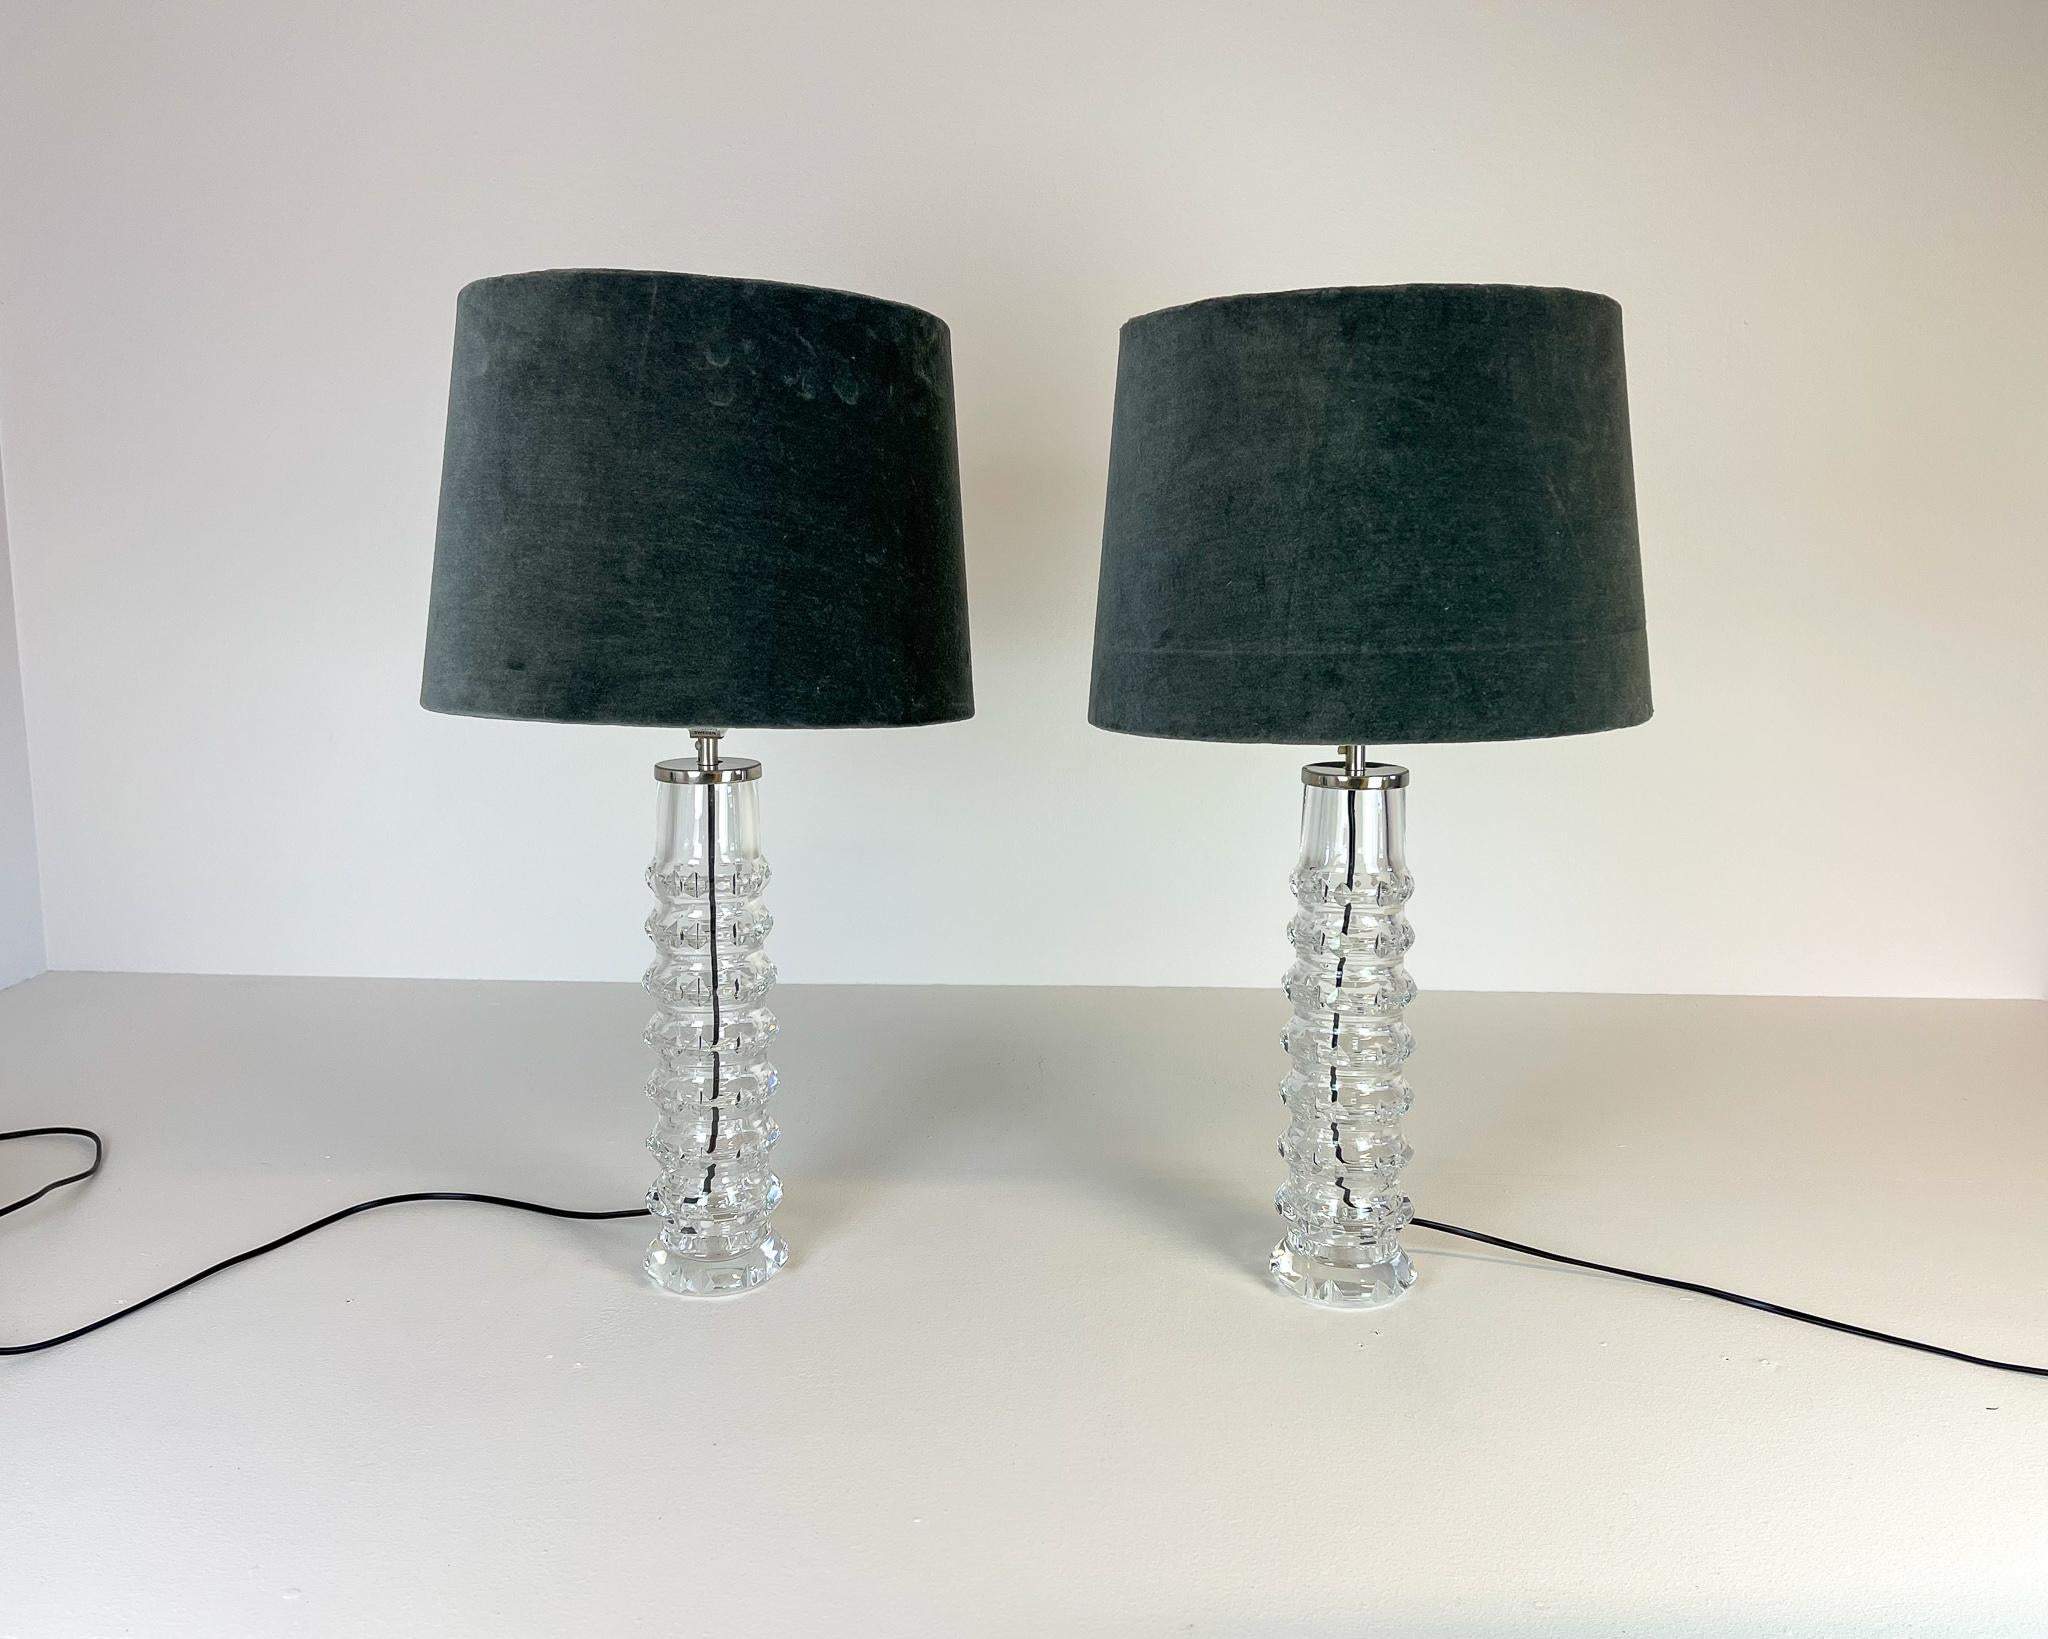 Scandinavian Modern Midcentury Pair of Crystal Lamps by Carl Fagerlund for Orrefors Sweden, 1970s For Sale